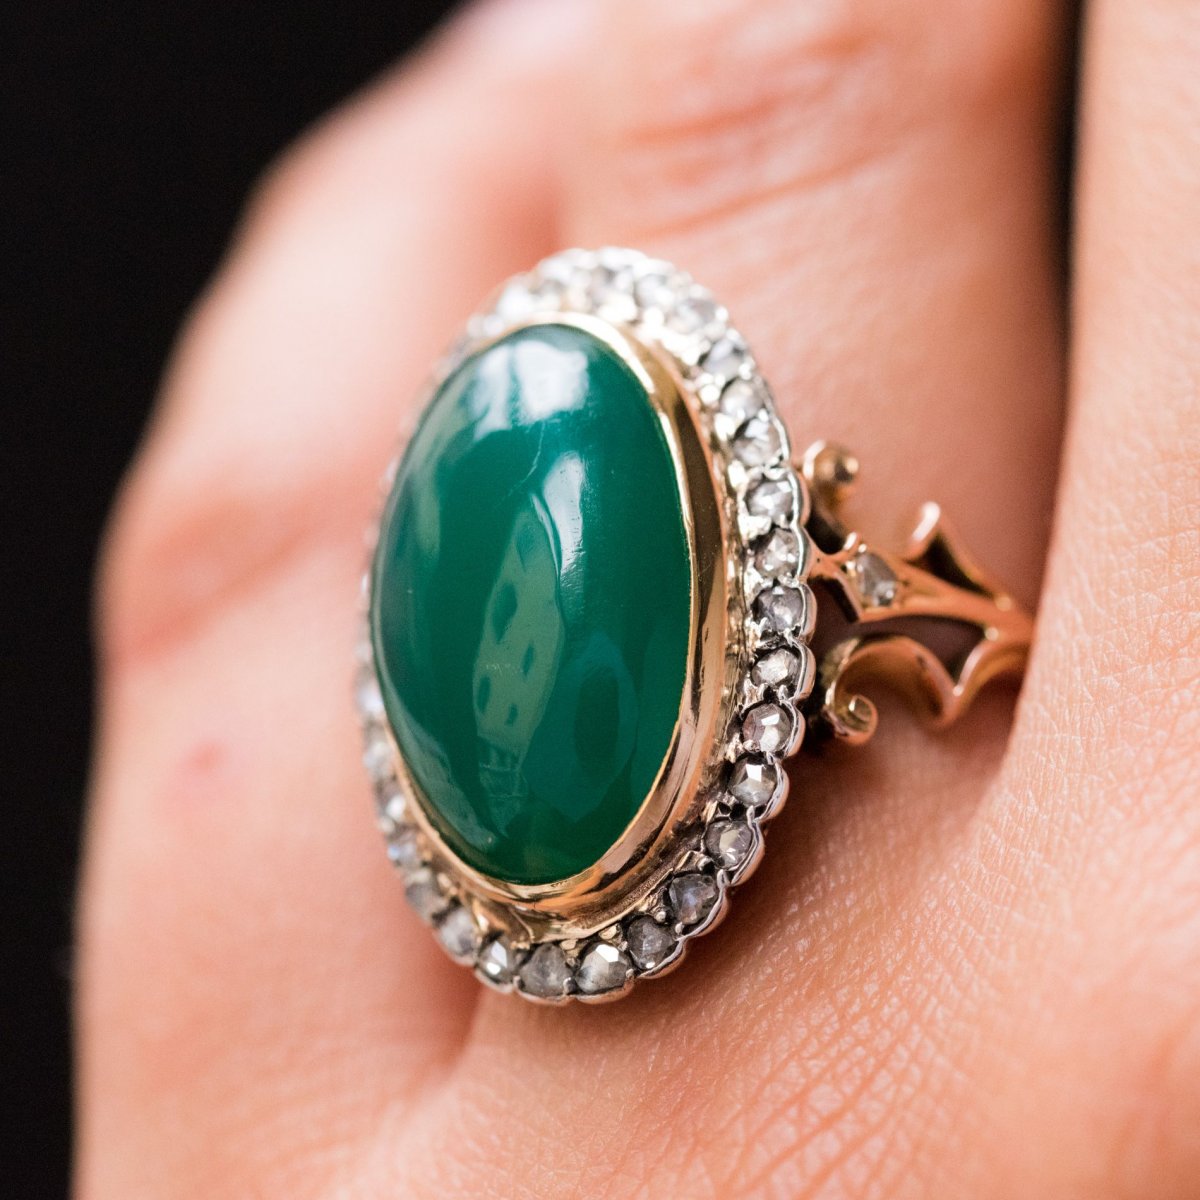 Old Green Agate And Rose Cut Diamond Ring-photo-4